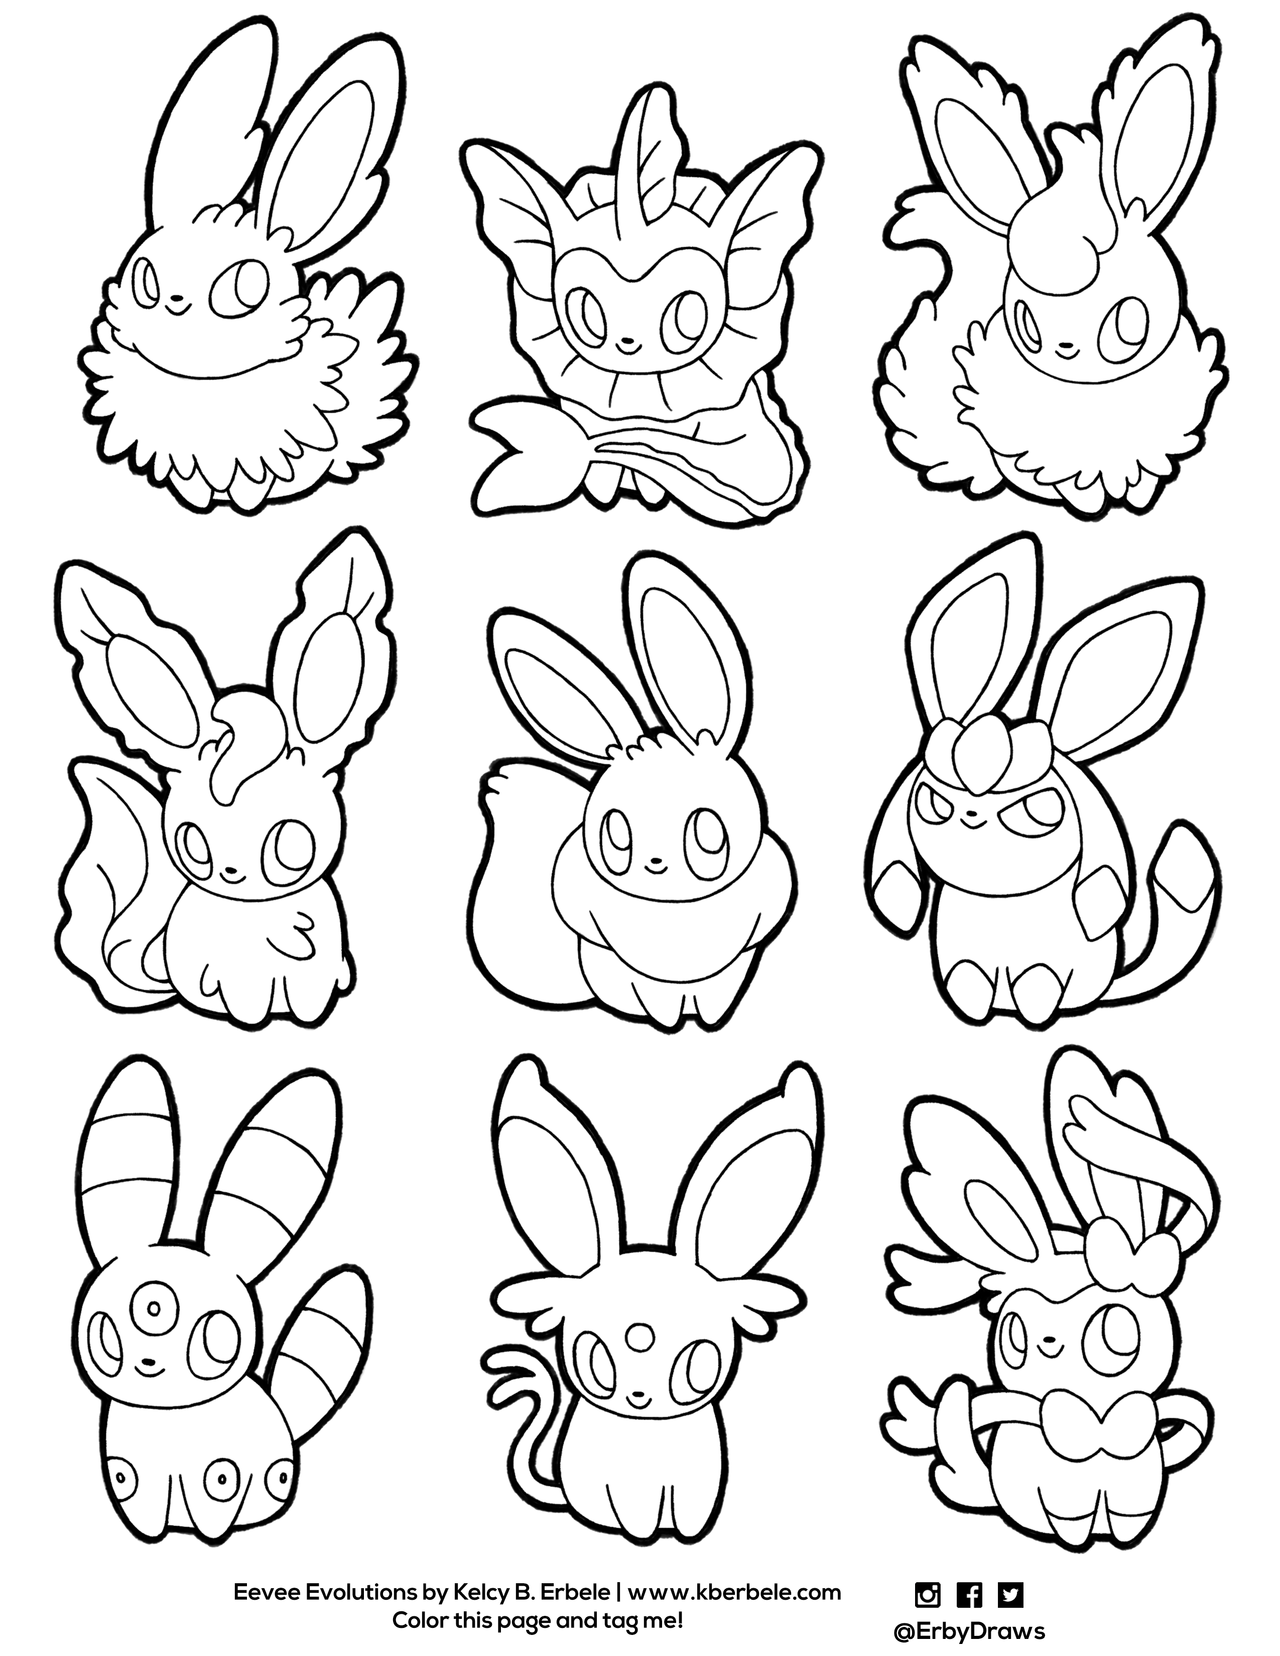 200 Eevee Coloring Pages: Evolve Your Art Skills 17